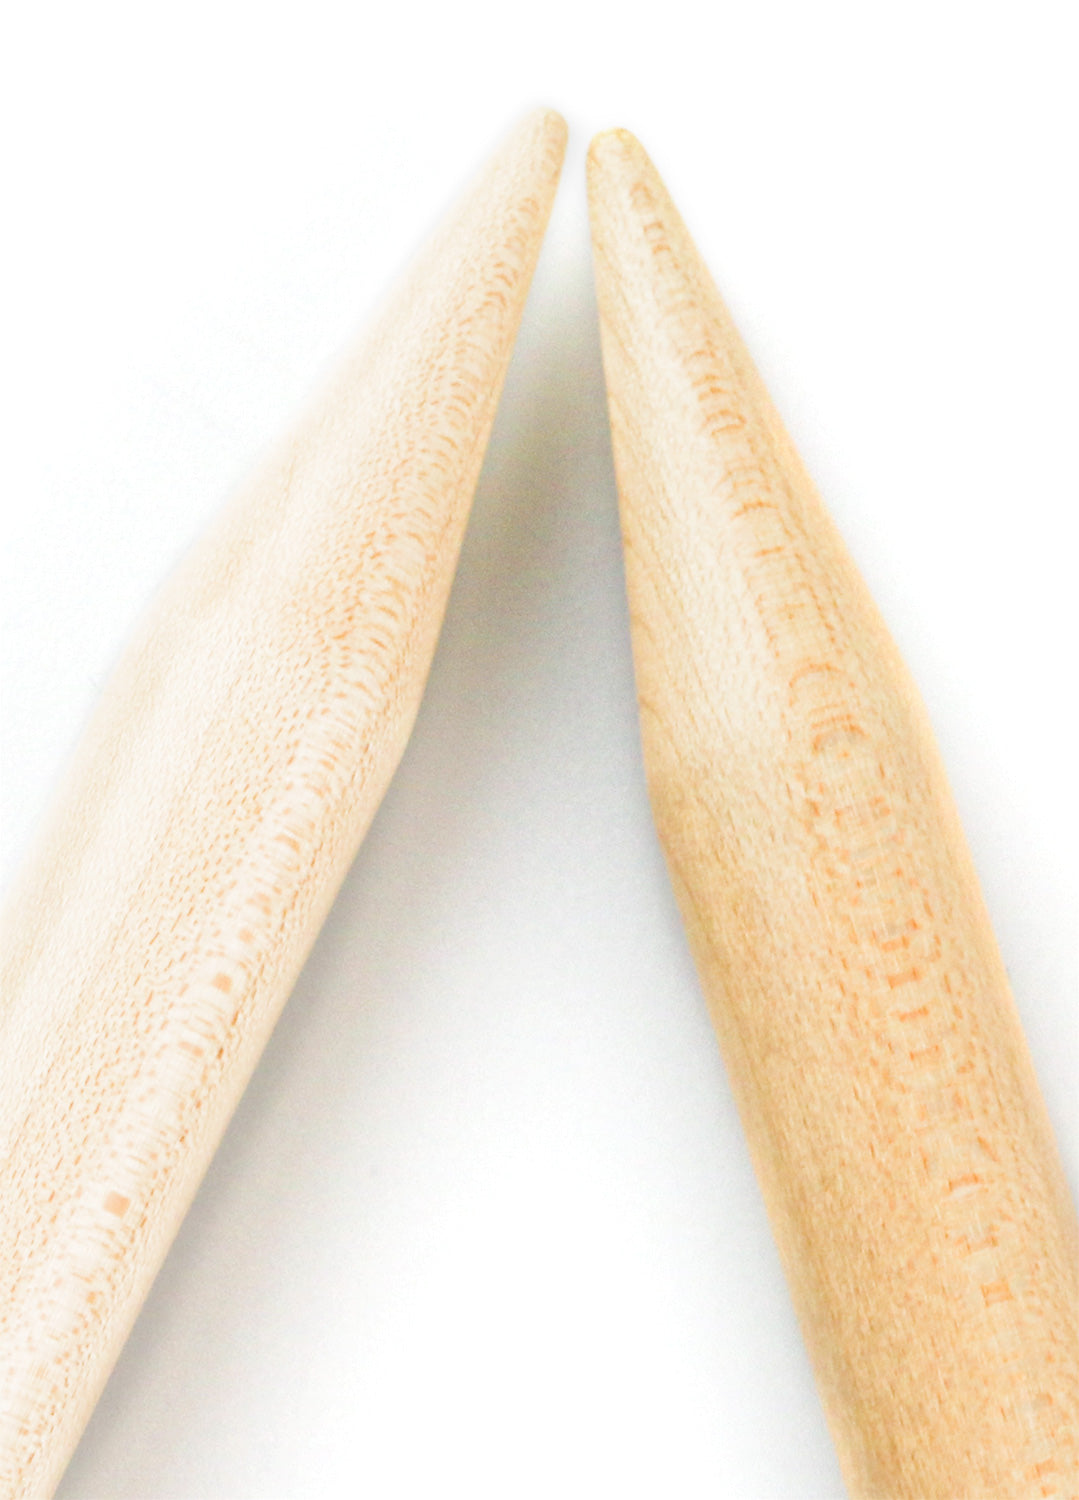 Giant Knitting Needles Circular US 70 d35mm 150cm, Knitting Supplies Wooden  needles, Beech Smooth and durable